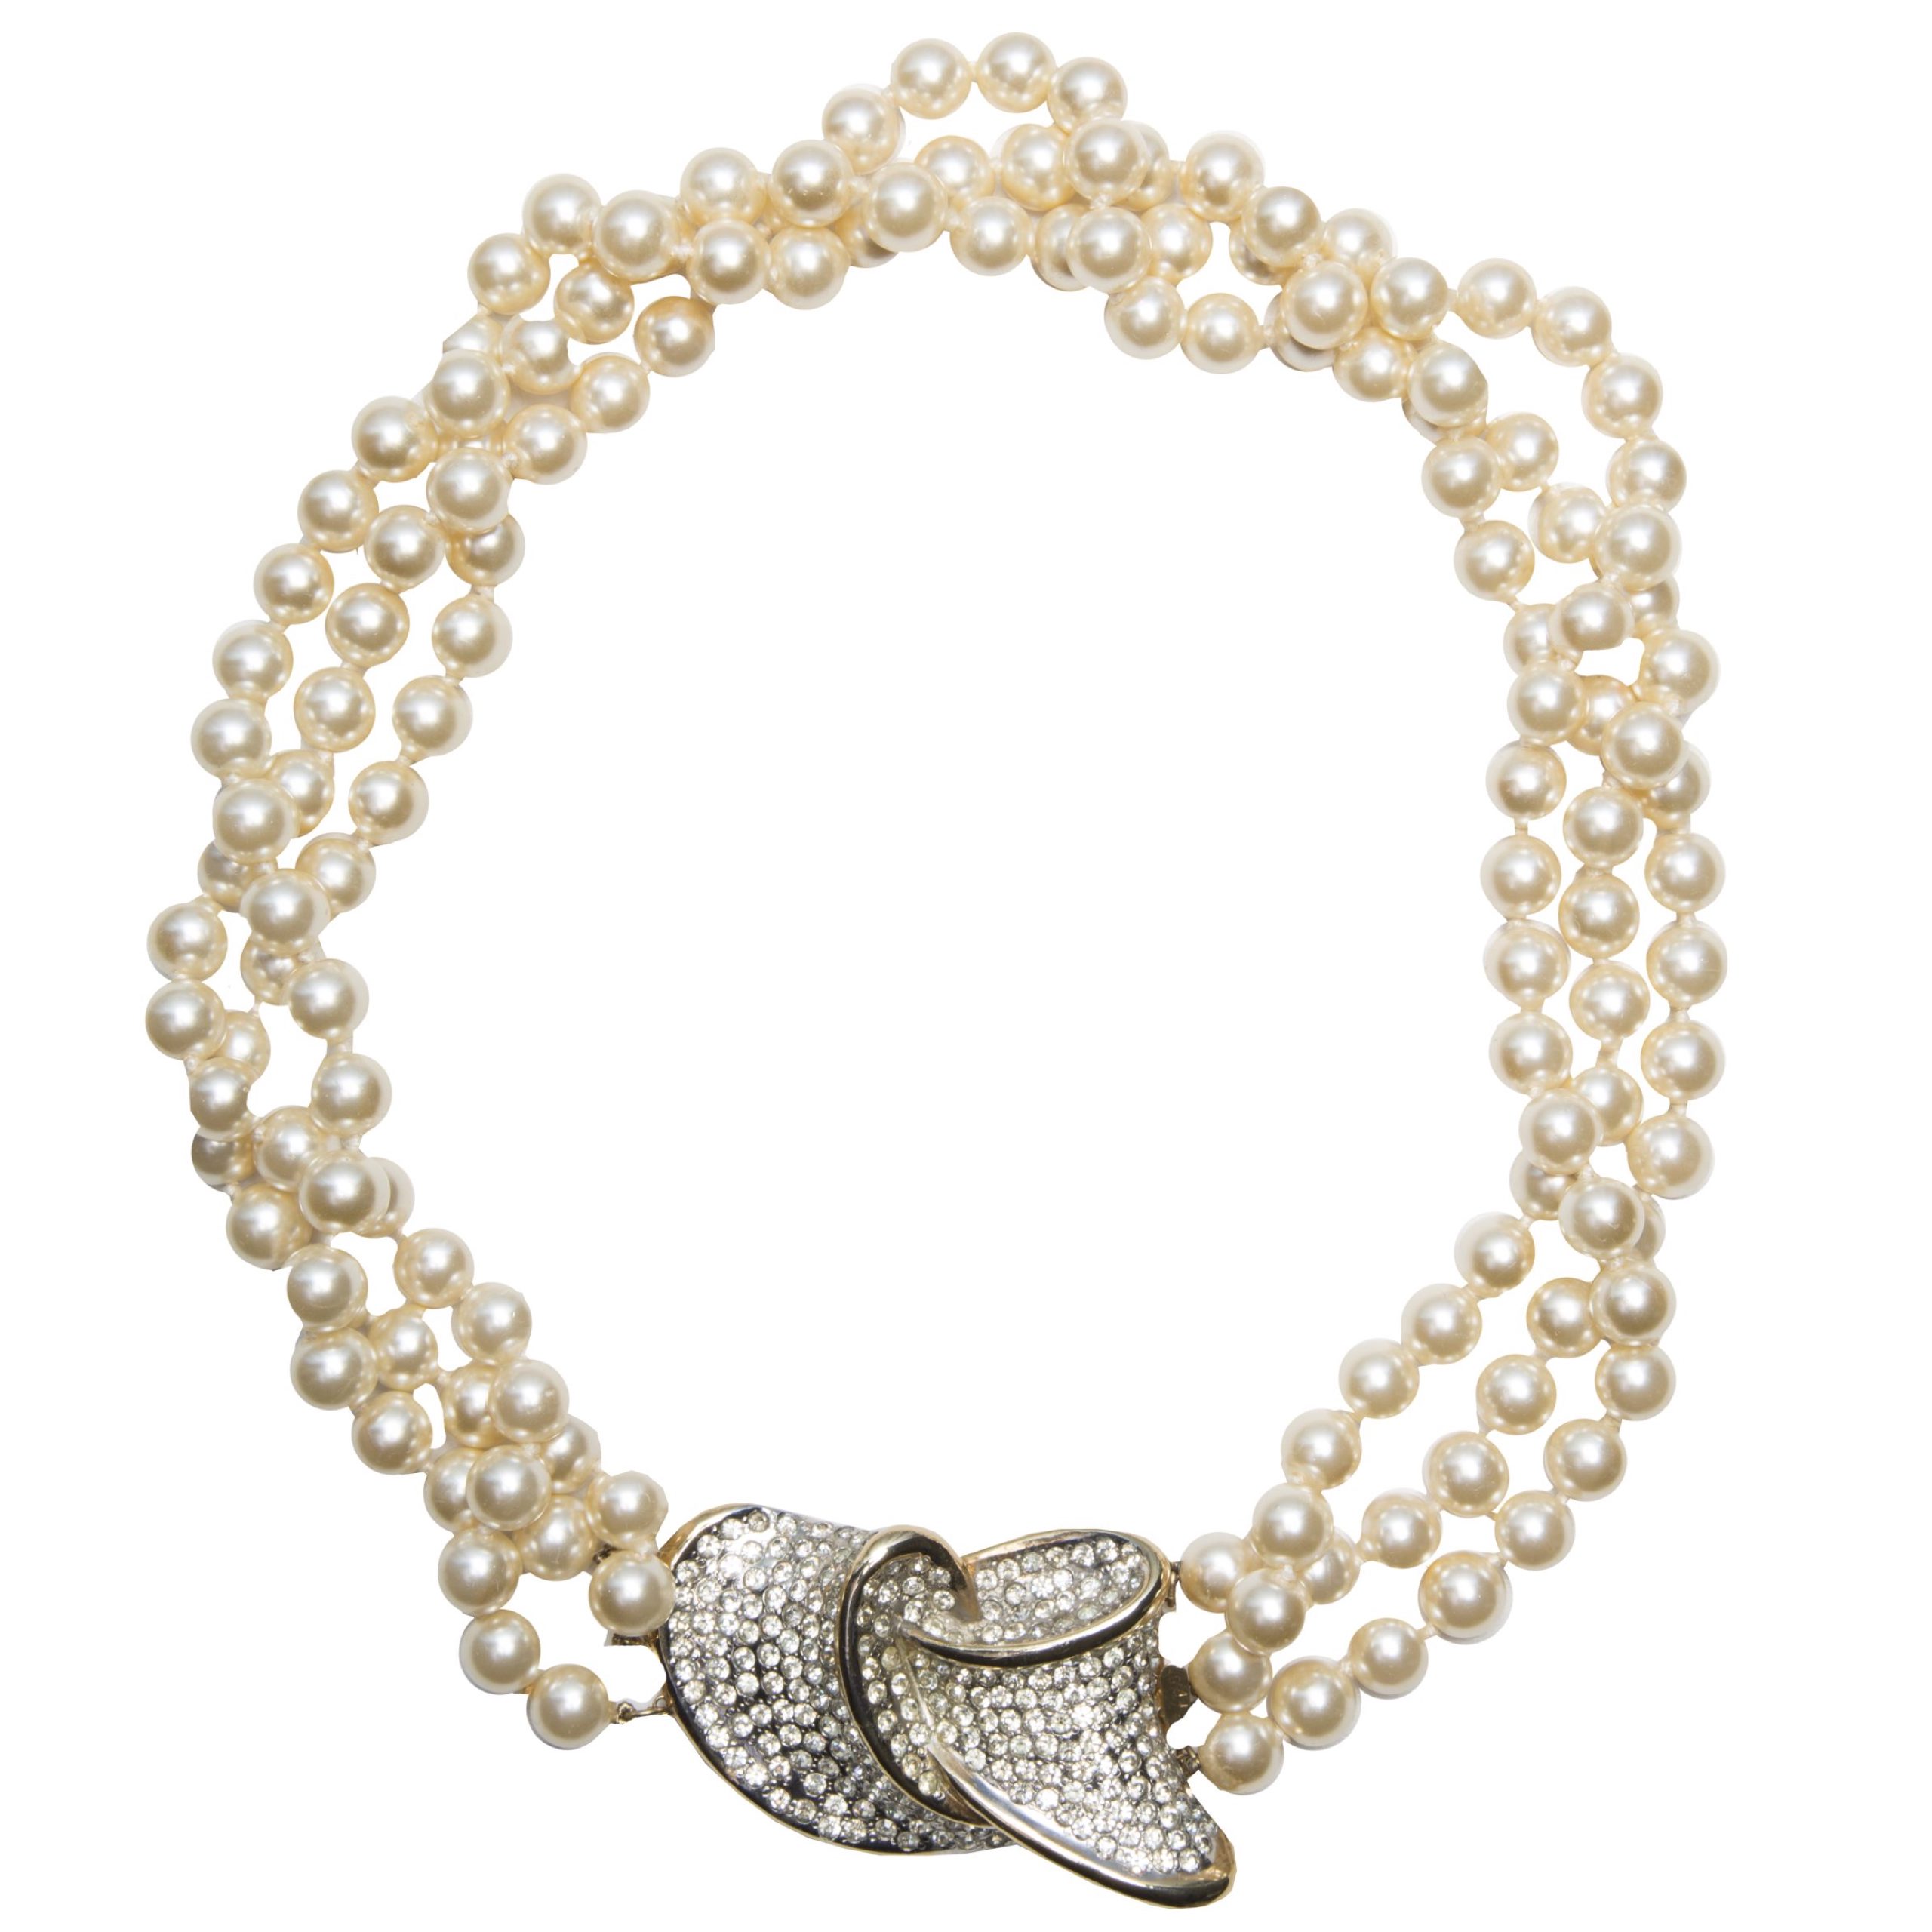 Vintage haute couture bow pearl necklace